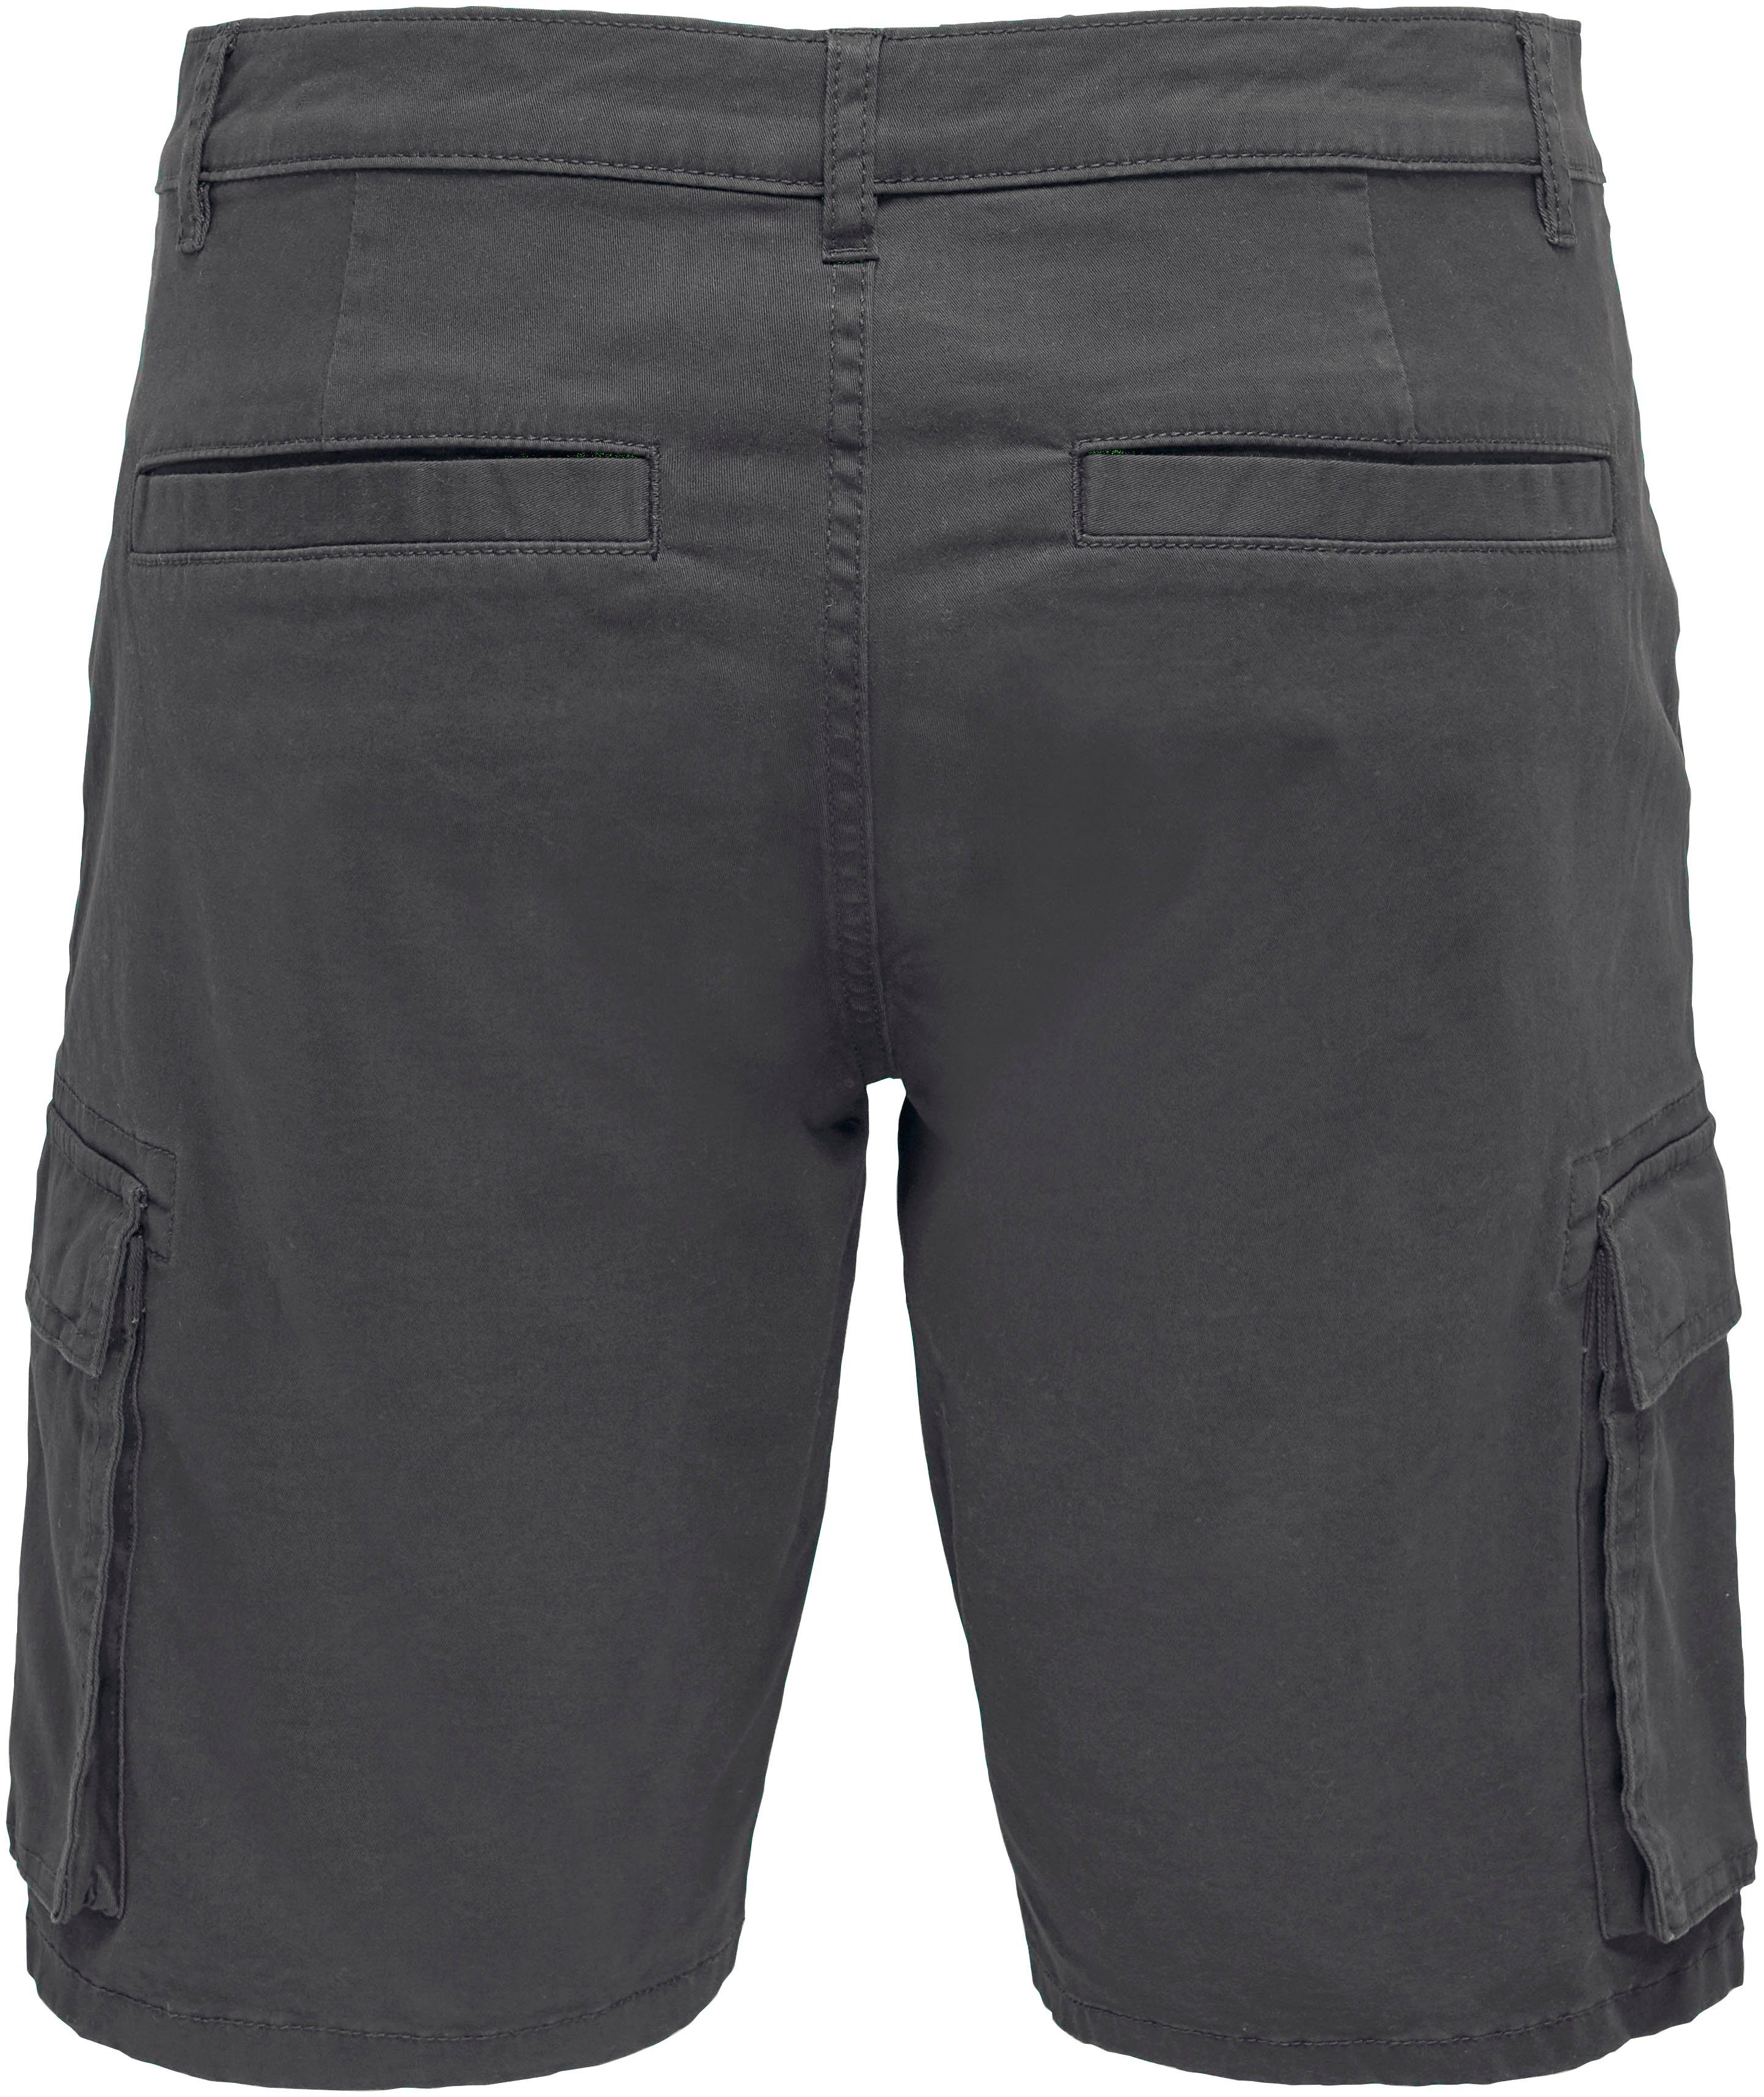 ONLY & SONS Cargoshorts CAM CARGO grau STAGE SHORTS